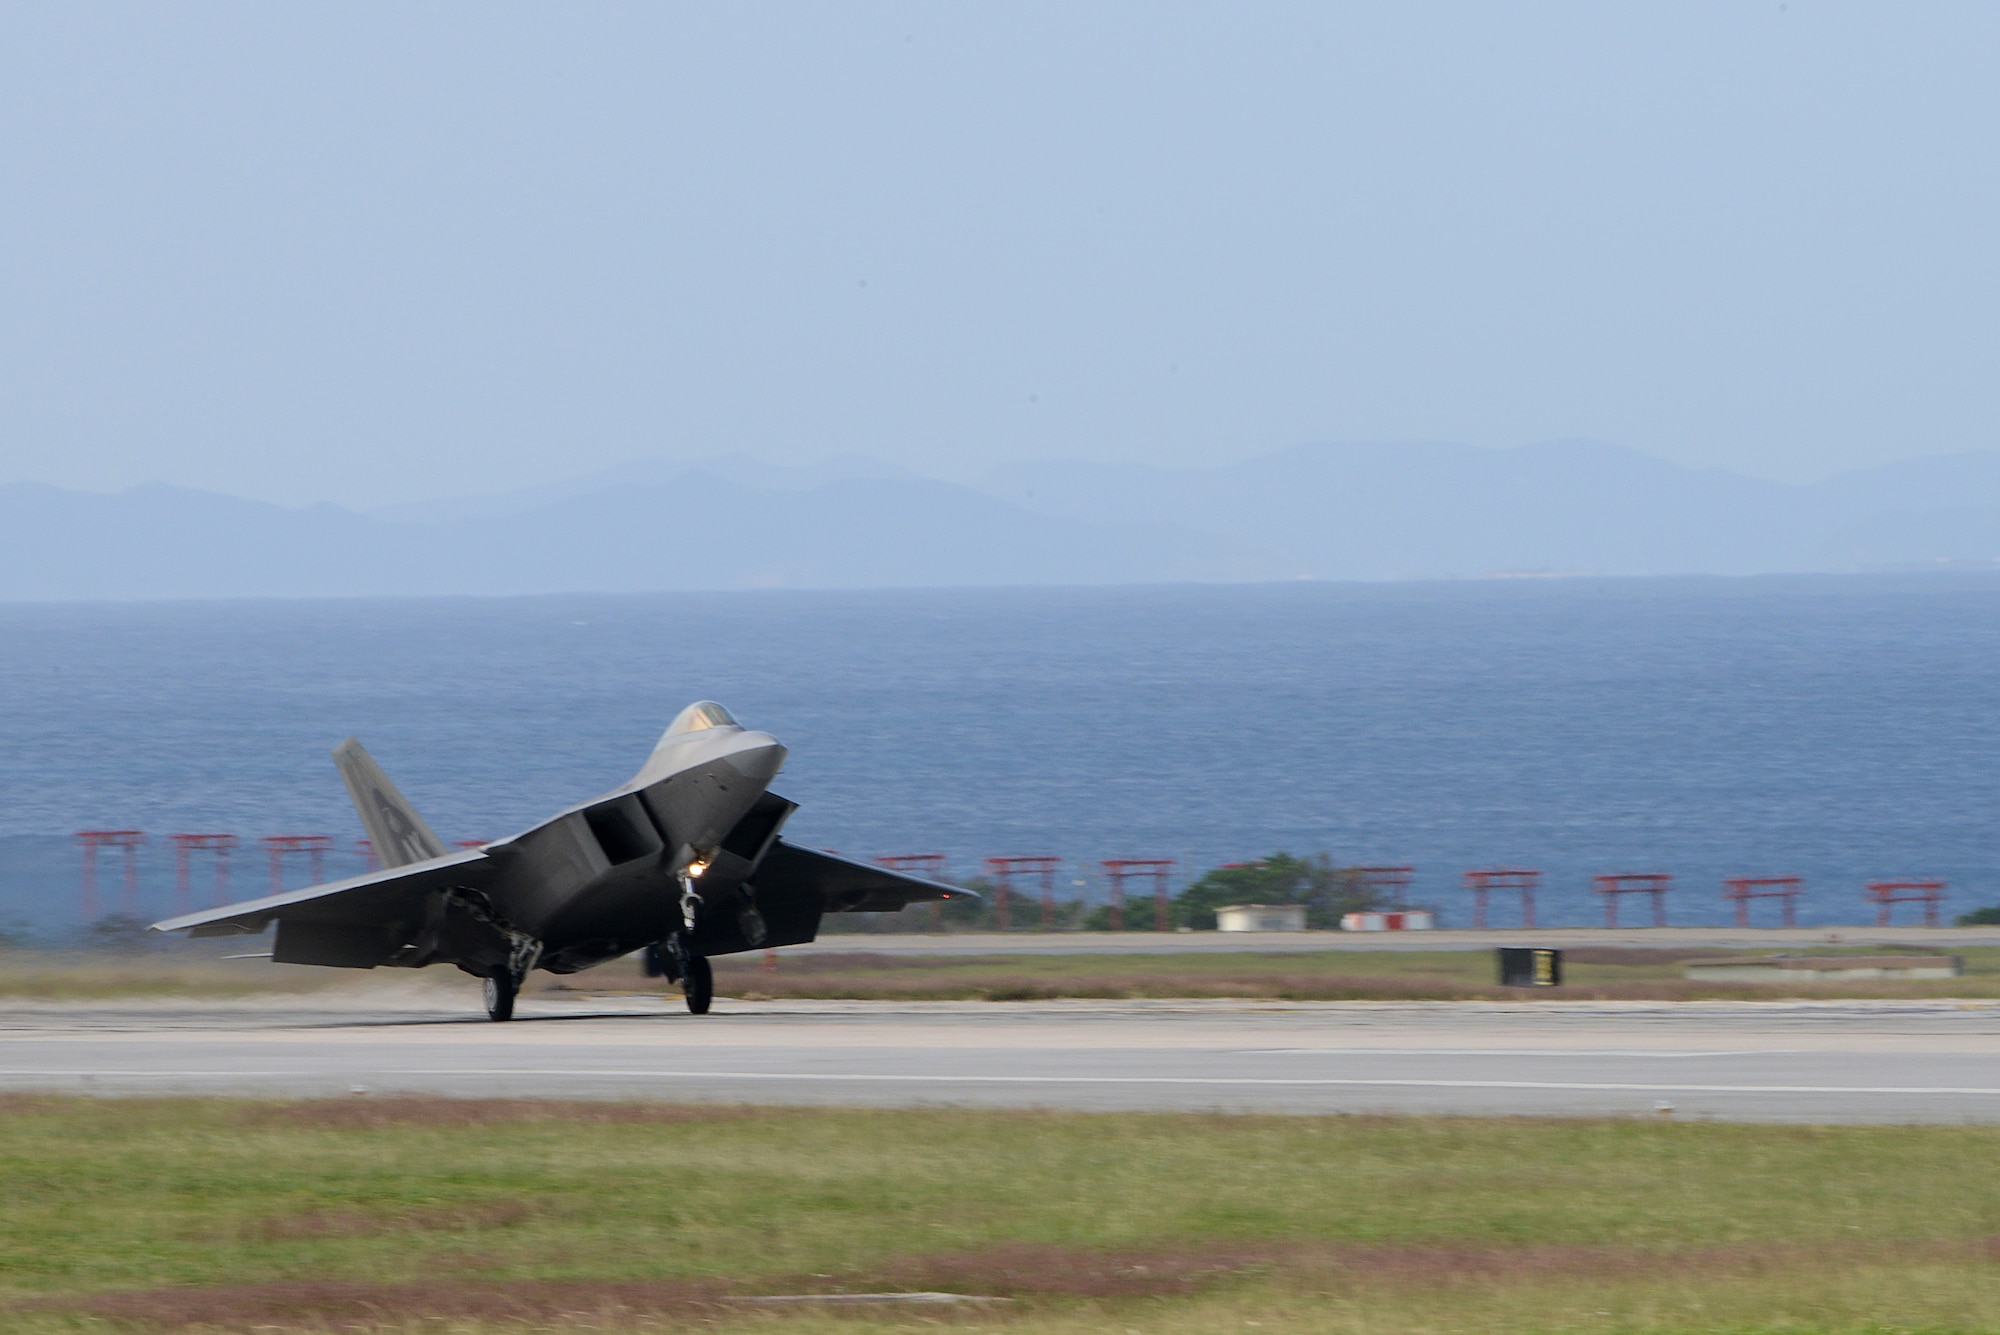 A U.S. Air Force F-22 Raptor from the 525th Fighter Squadron stationed at Joint Base Elmendorf-Richardson, Alaska, lands on the Kadena Air Base, Japan, runway during Keen Sword 2015 Nov. 14, 2014. The F-22 implements a combination of stealth, supercruise, high maneuverability and integrated avionics in order to project air dominance rapidly and at great distances in order to maintain to defeat threats and protect the U.S. and host nation allies in the region. (U.S. Air Force photo by Senior Airman Maeson L. Elleman/Released)